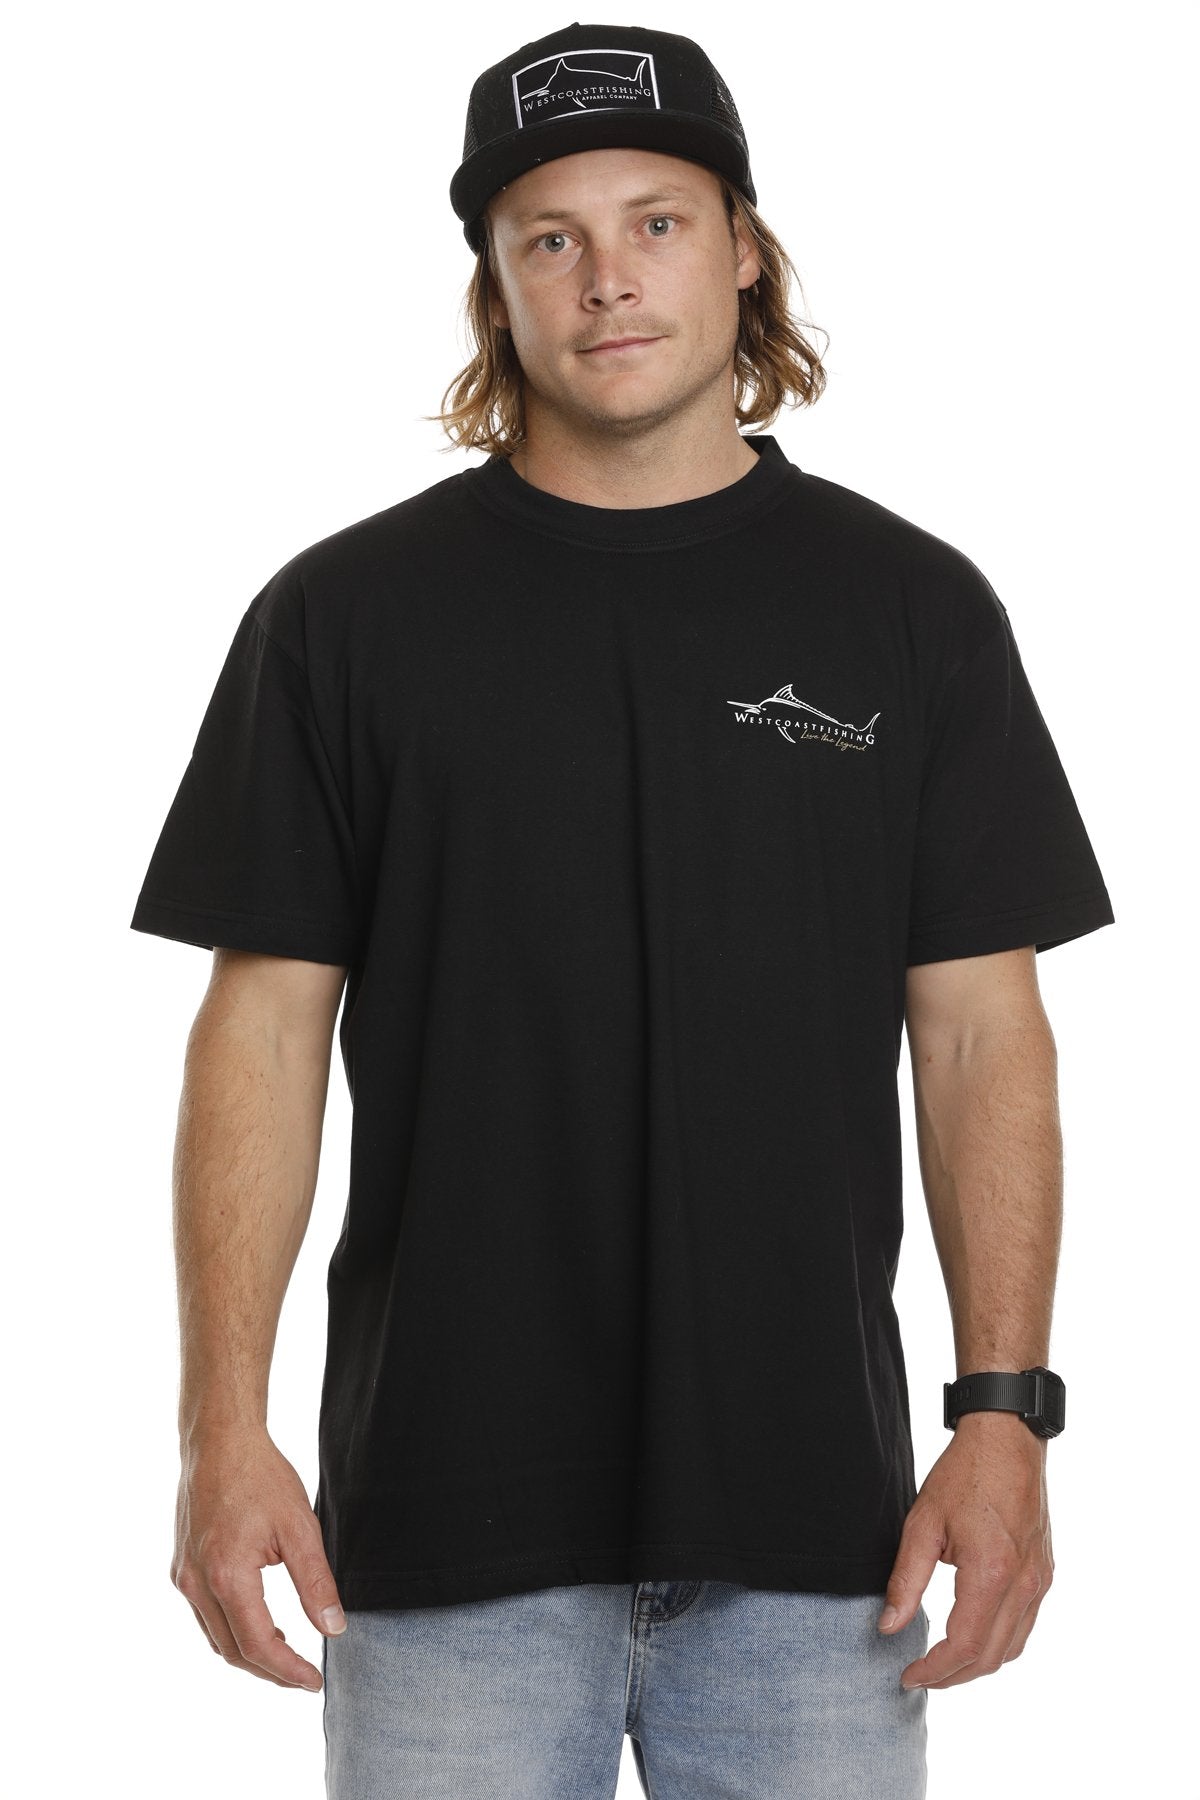 West Coast Fishing Co Heavy Tackle Tee Black Front